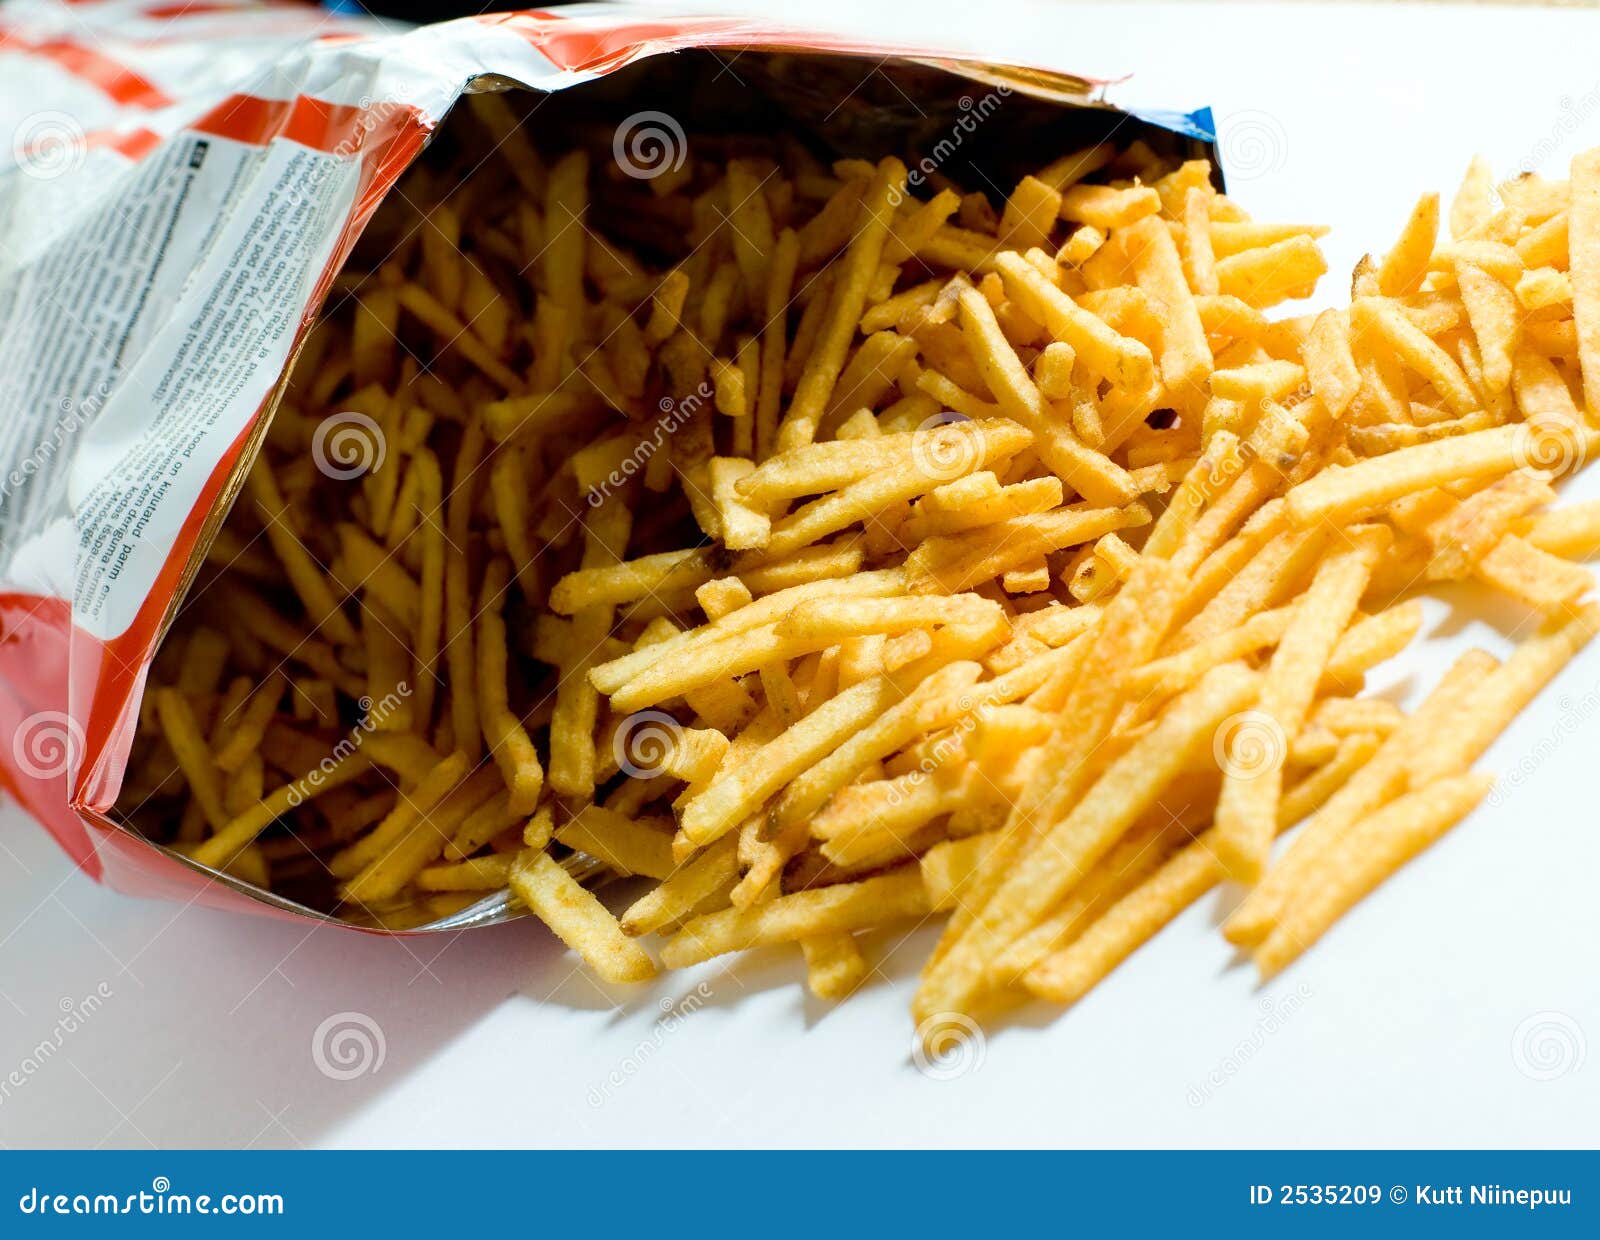 packet of french fries